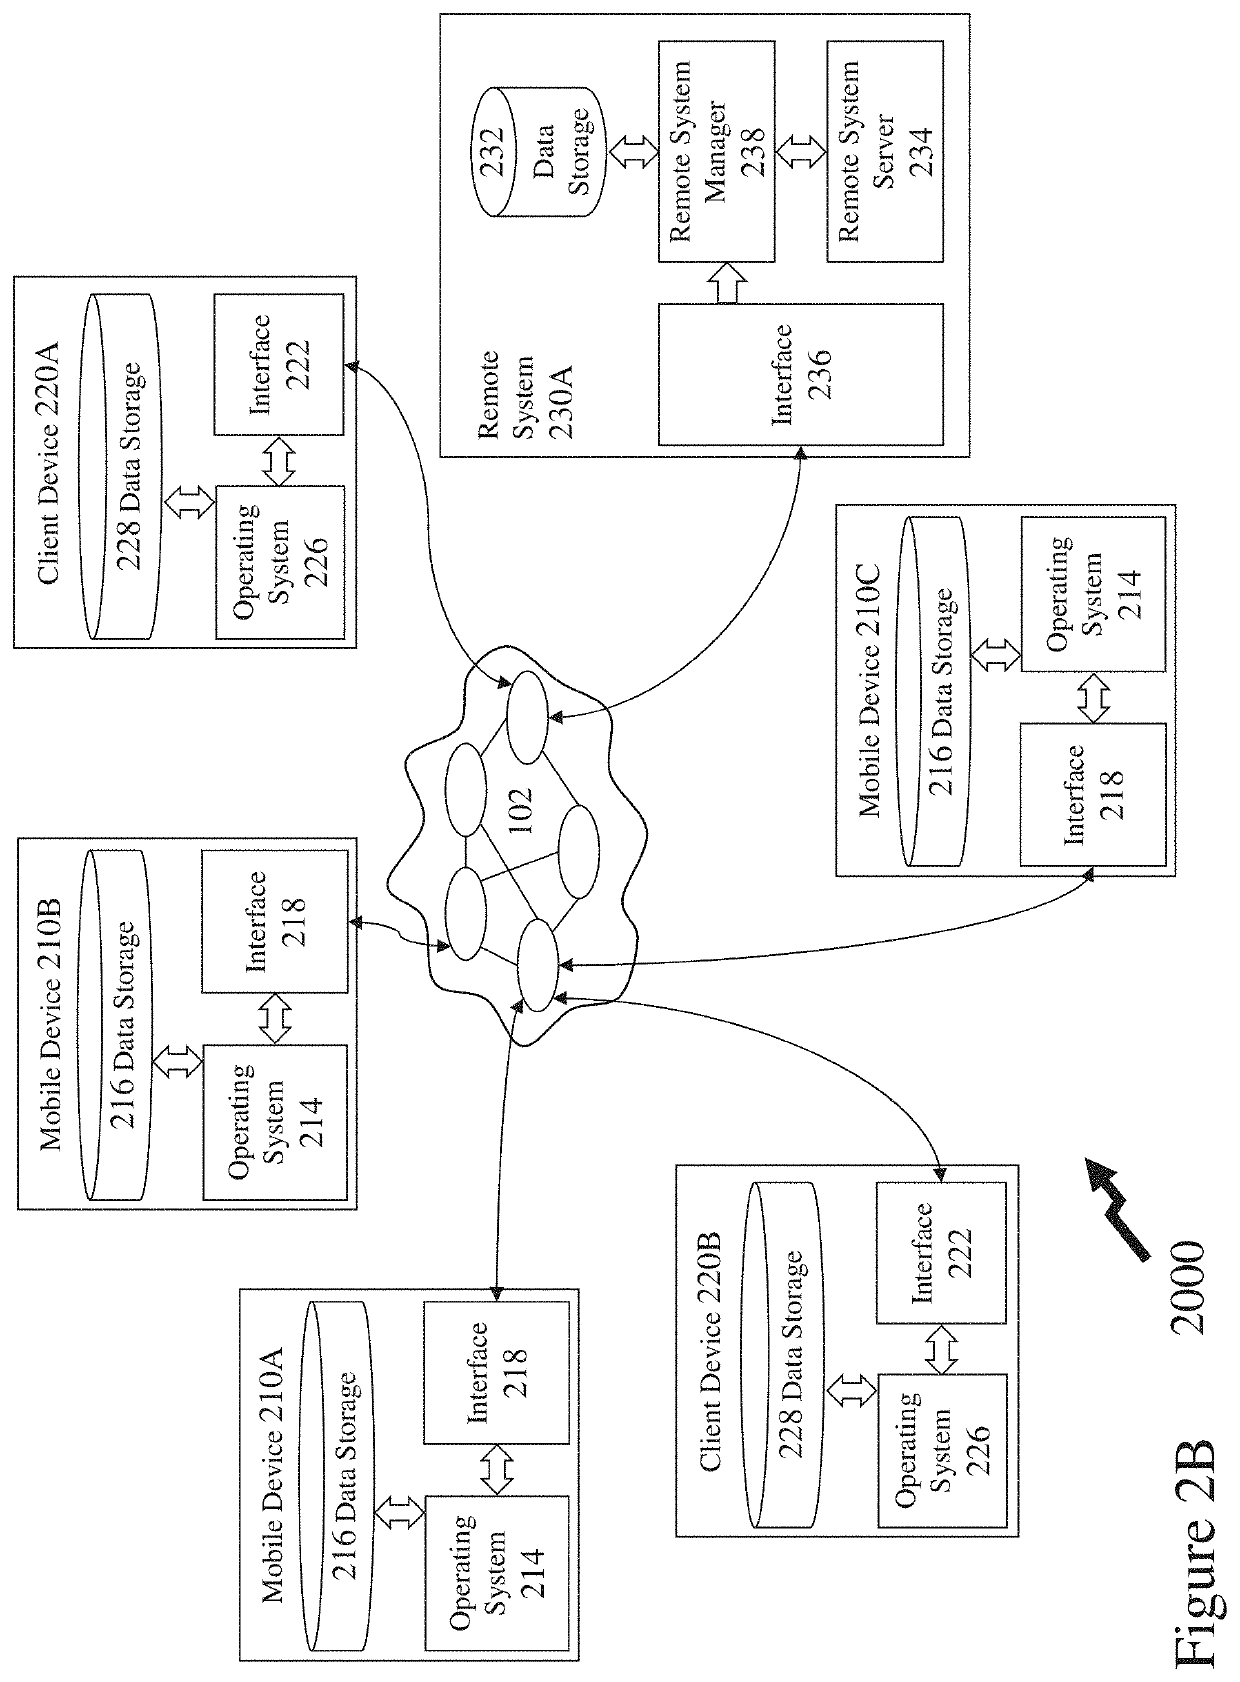 External content capture for visual mapping methods and systems